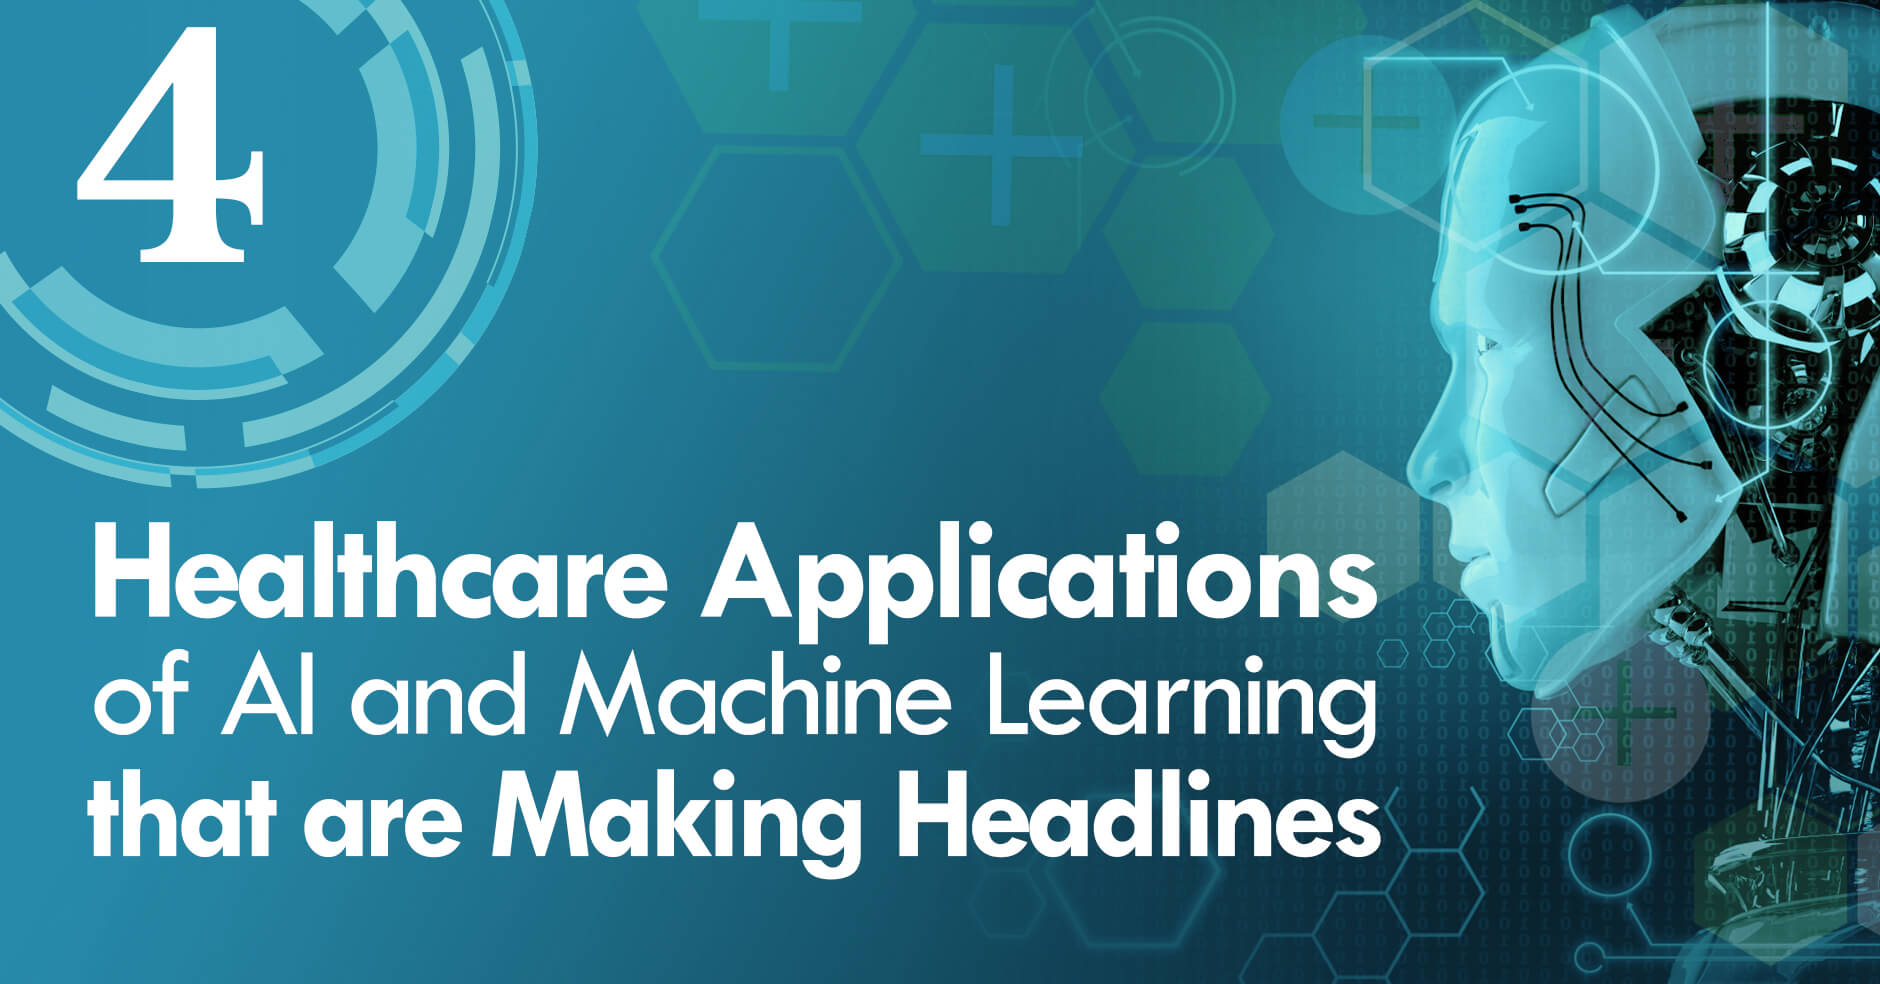 4 Healthcare Applications of AI and Machine Learning that are Making Headlines